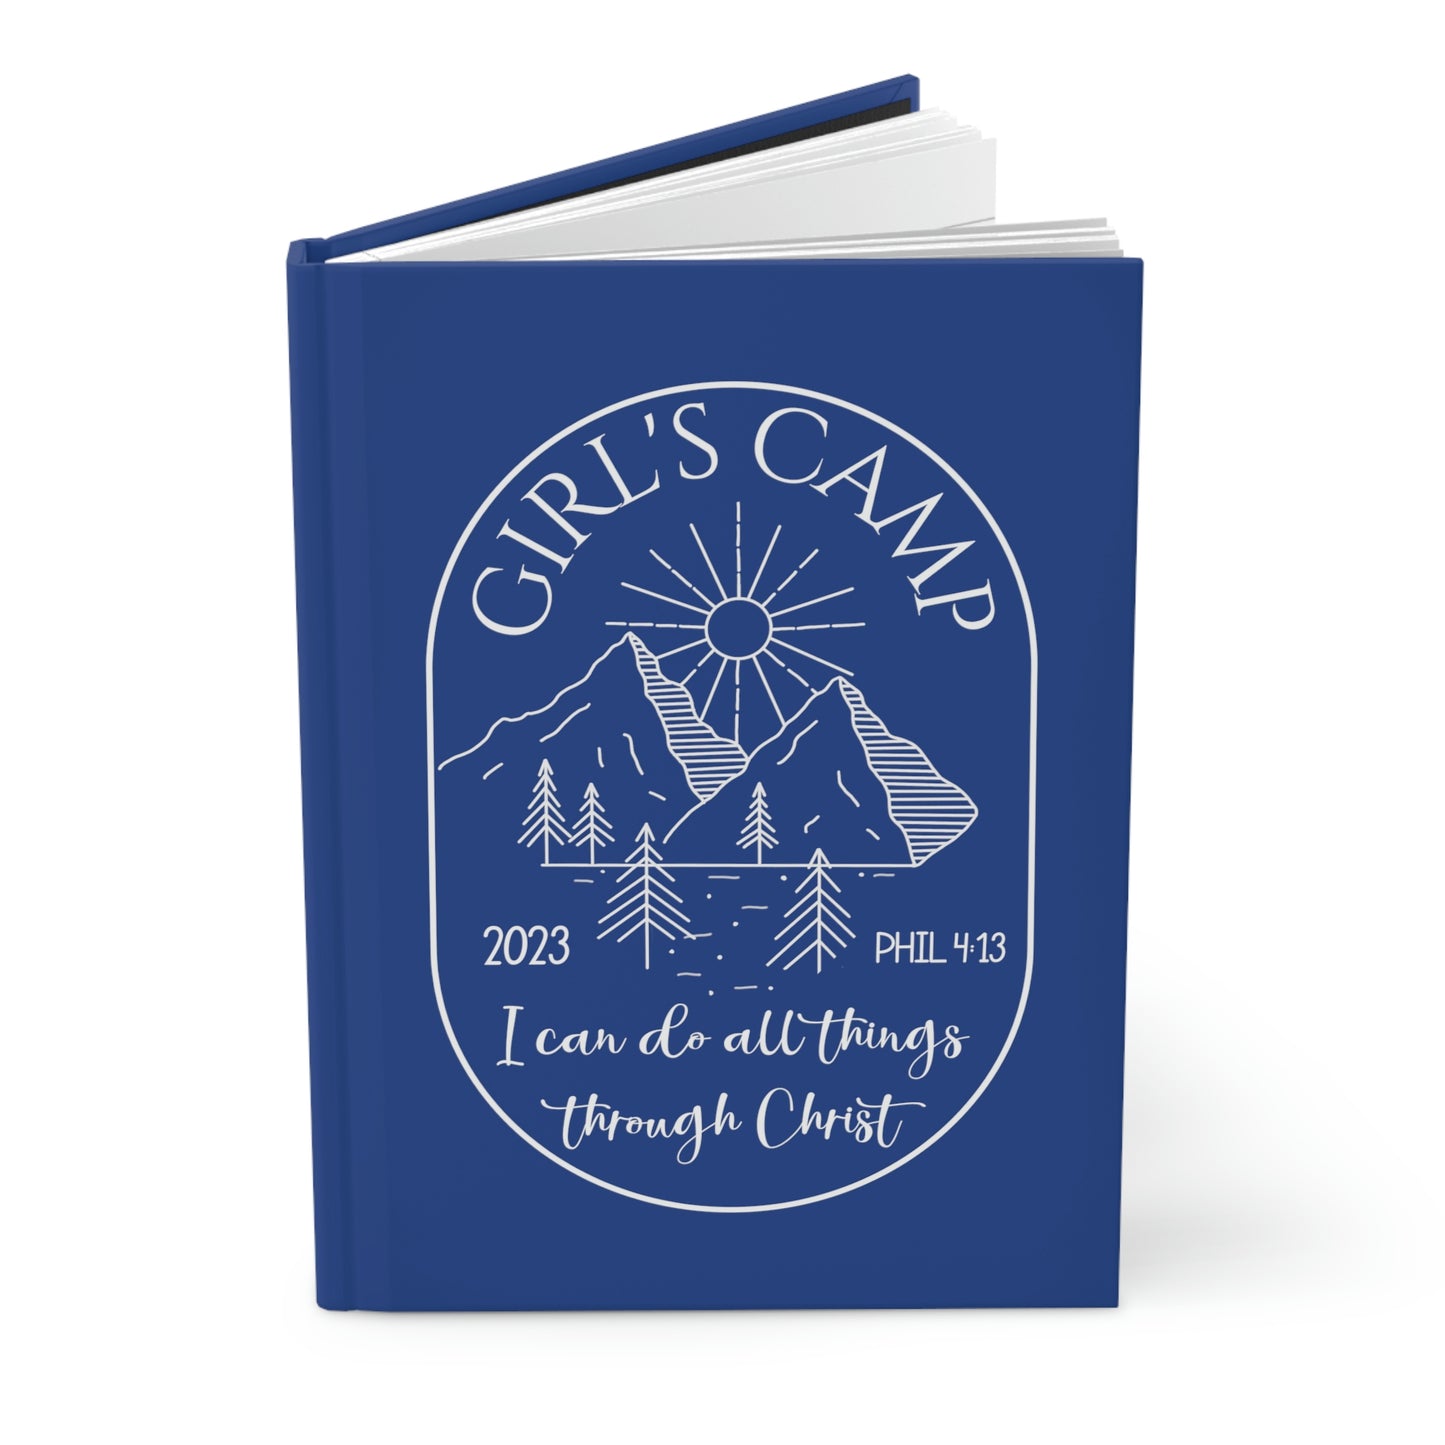 Hardcover Journal Matte, Girl's Camp, 2023 Youth Theme, Stake Camp, Young Women's